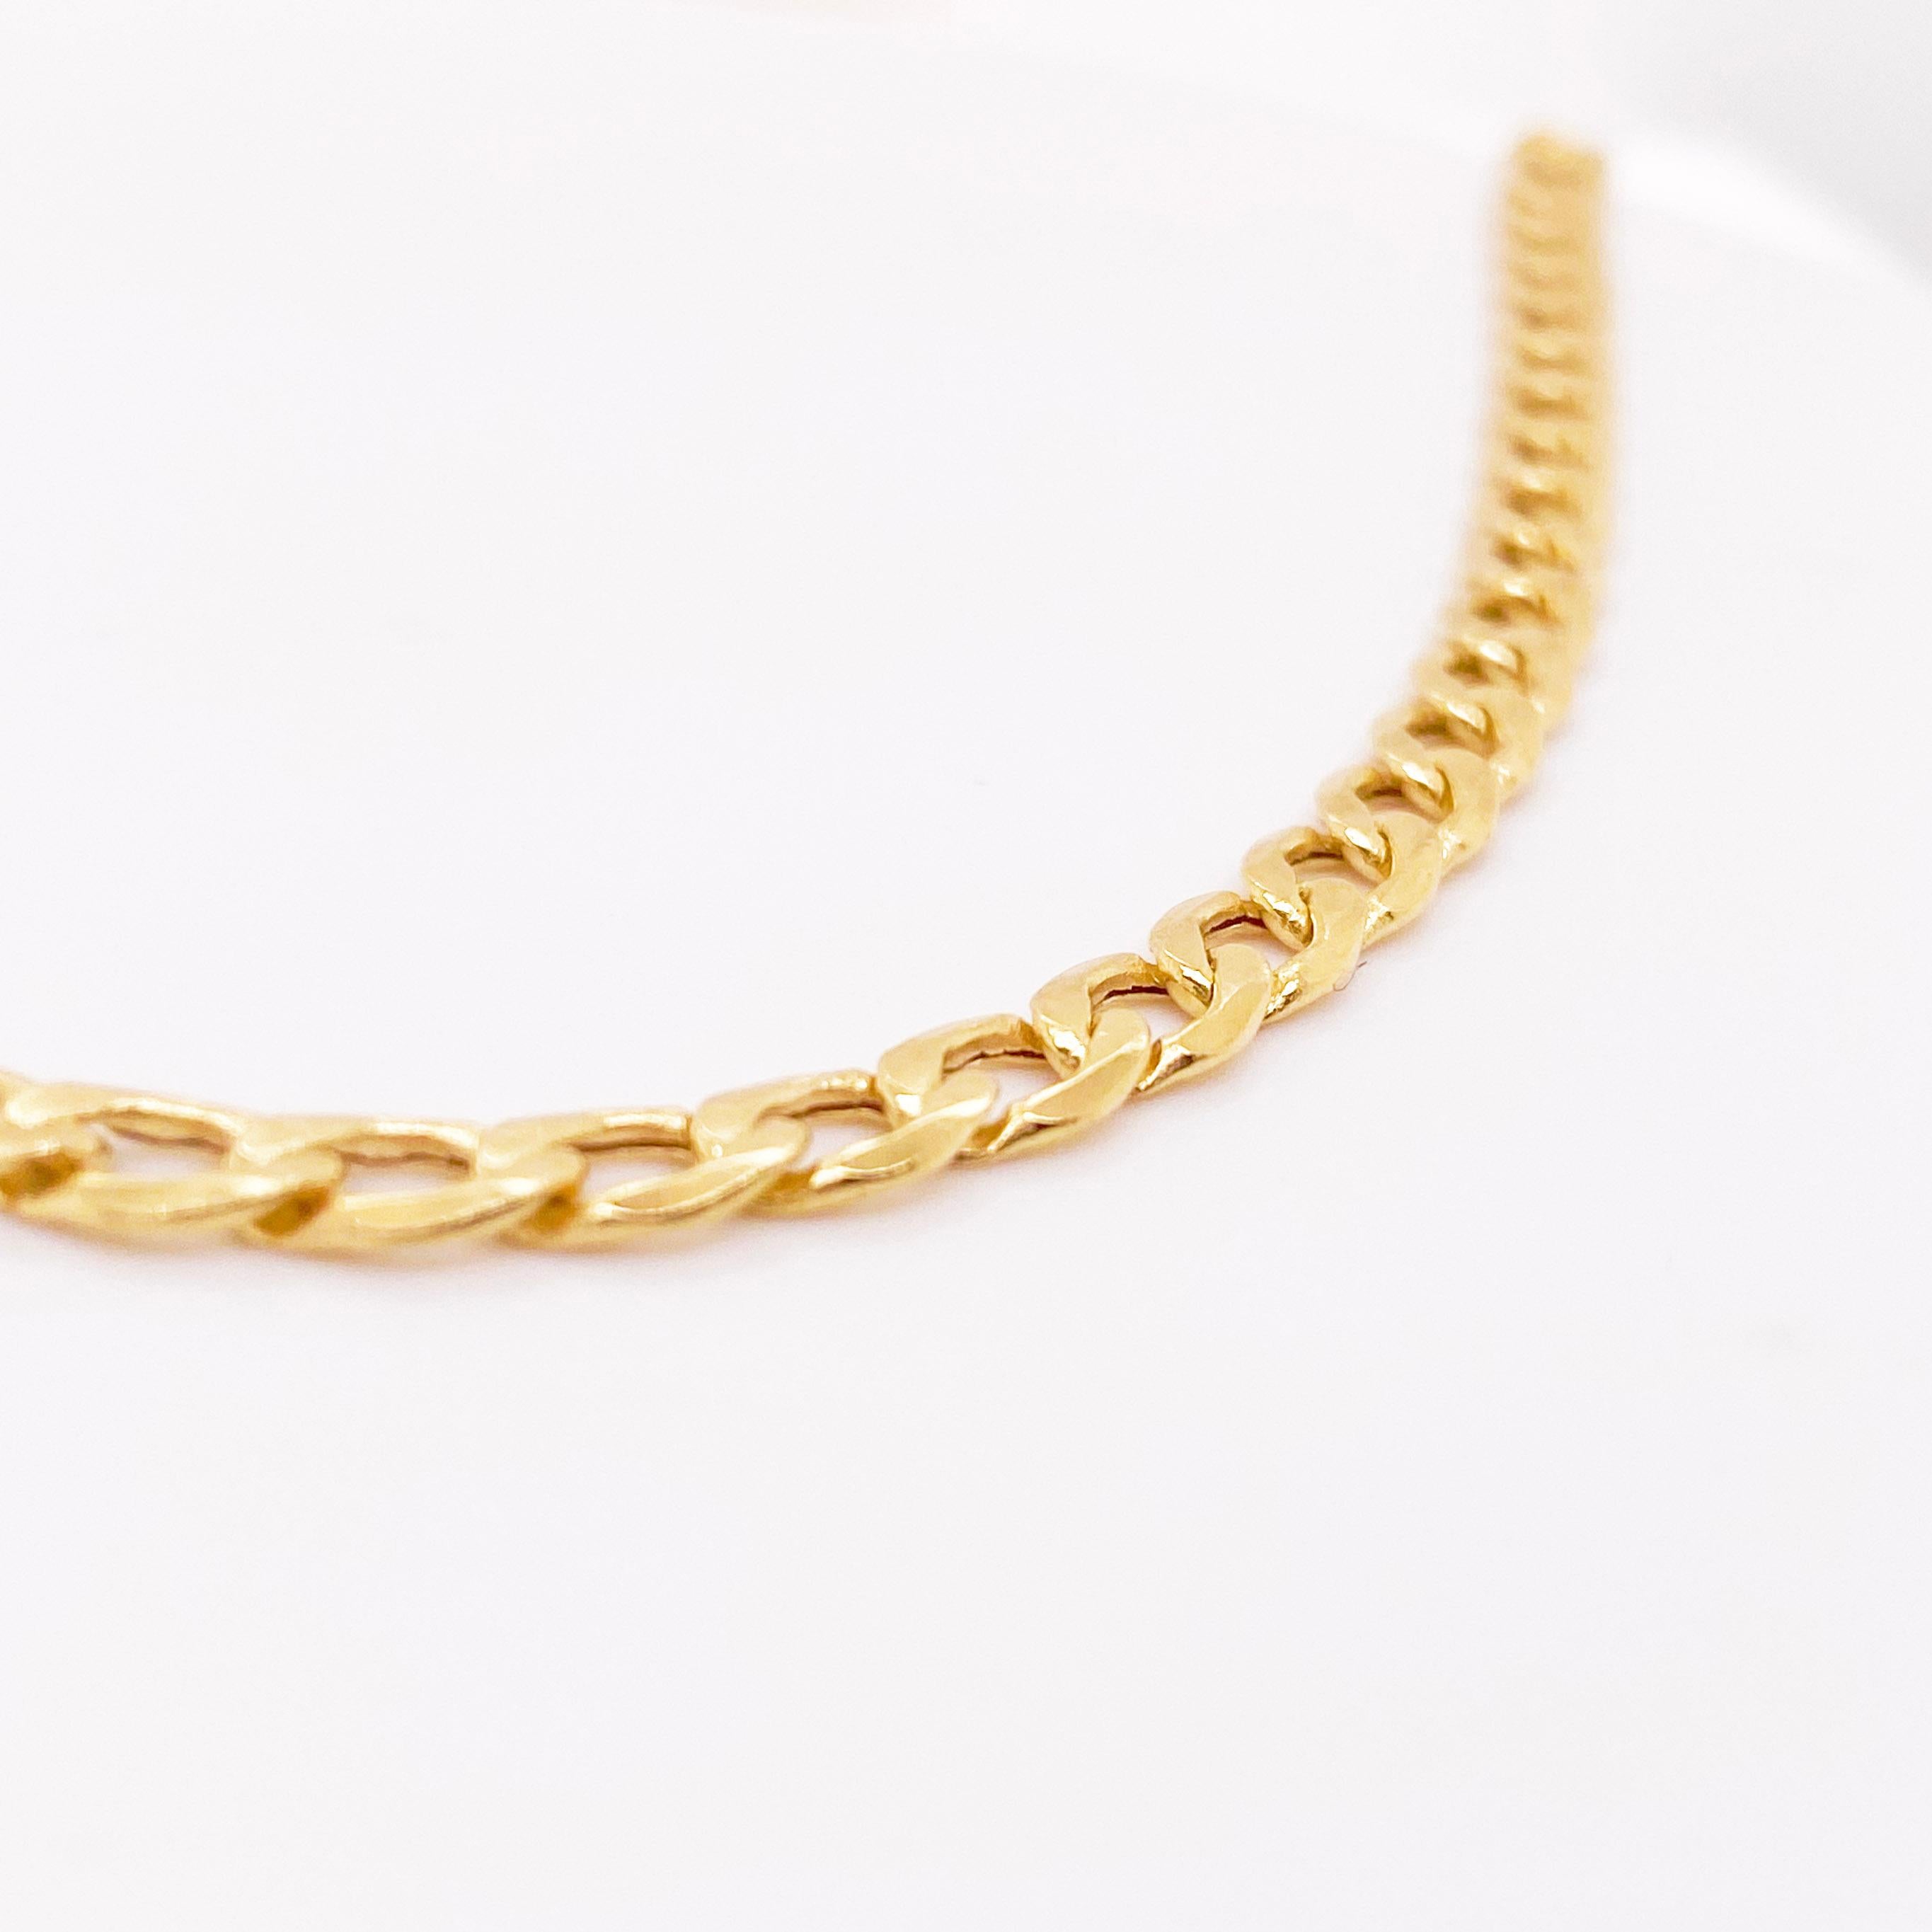 The perfect heavy chain for a man or woman. The 20 inches is the perfect length for most men but if you need a 22 or 24 inch, we can offer that too! Women love this length if they want something that is not a choker. The details for this beautiful